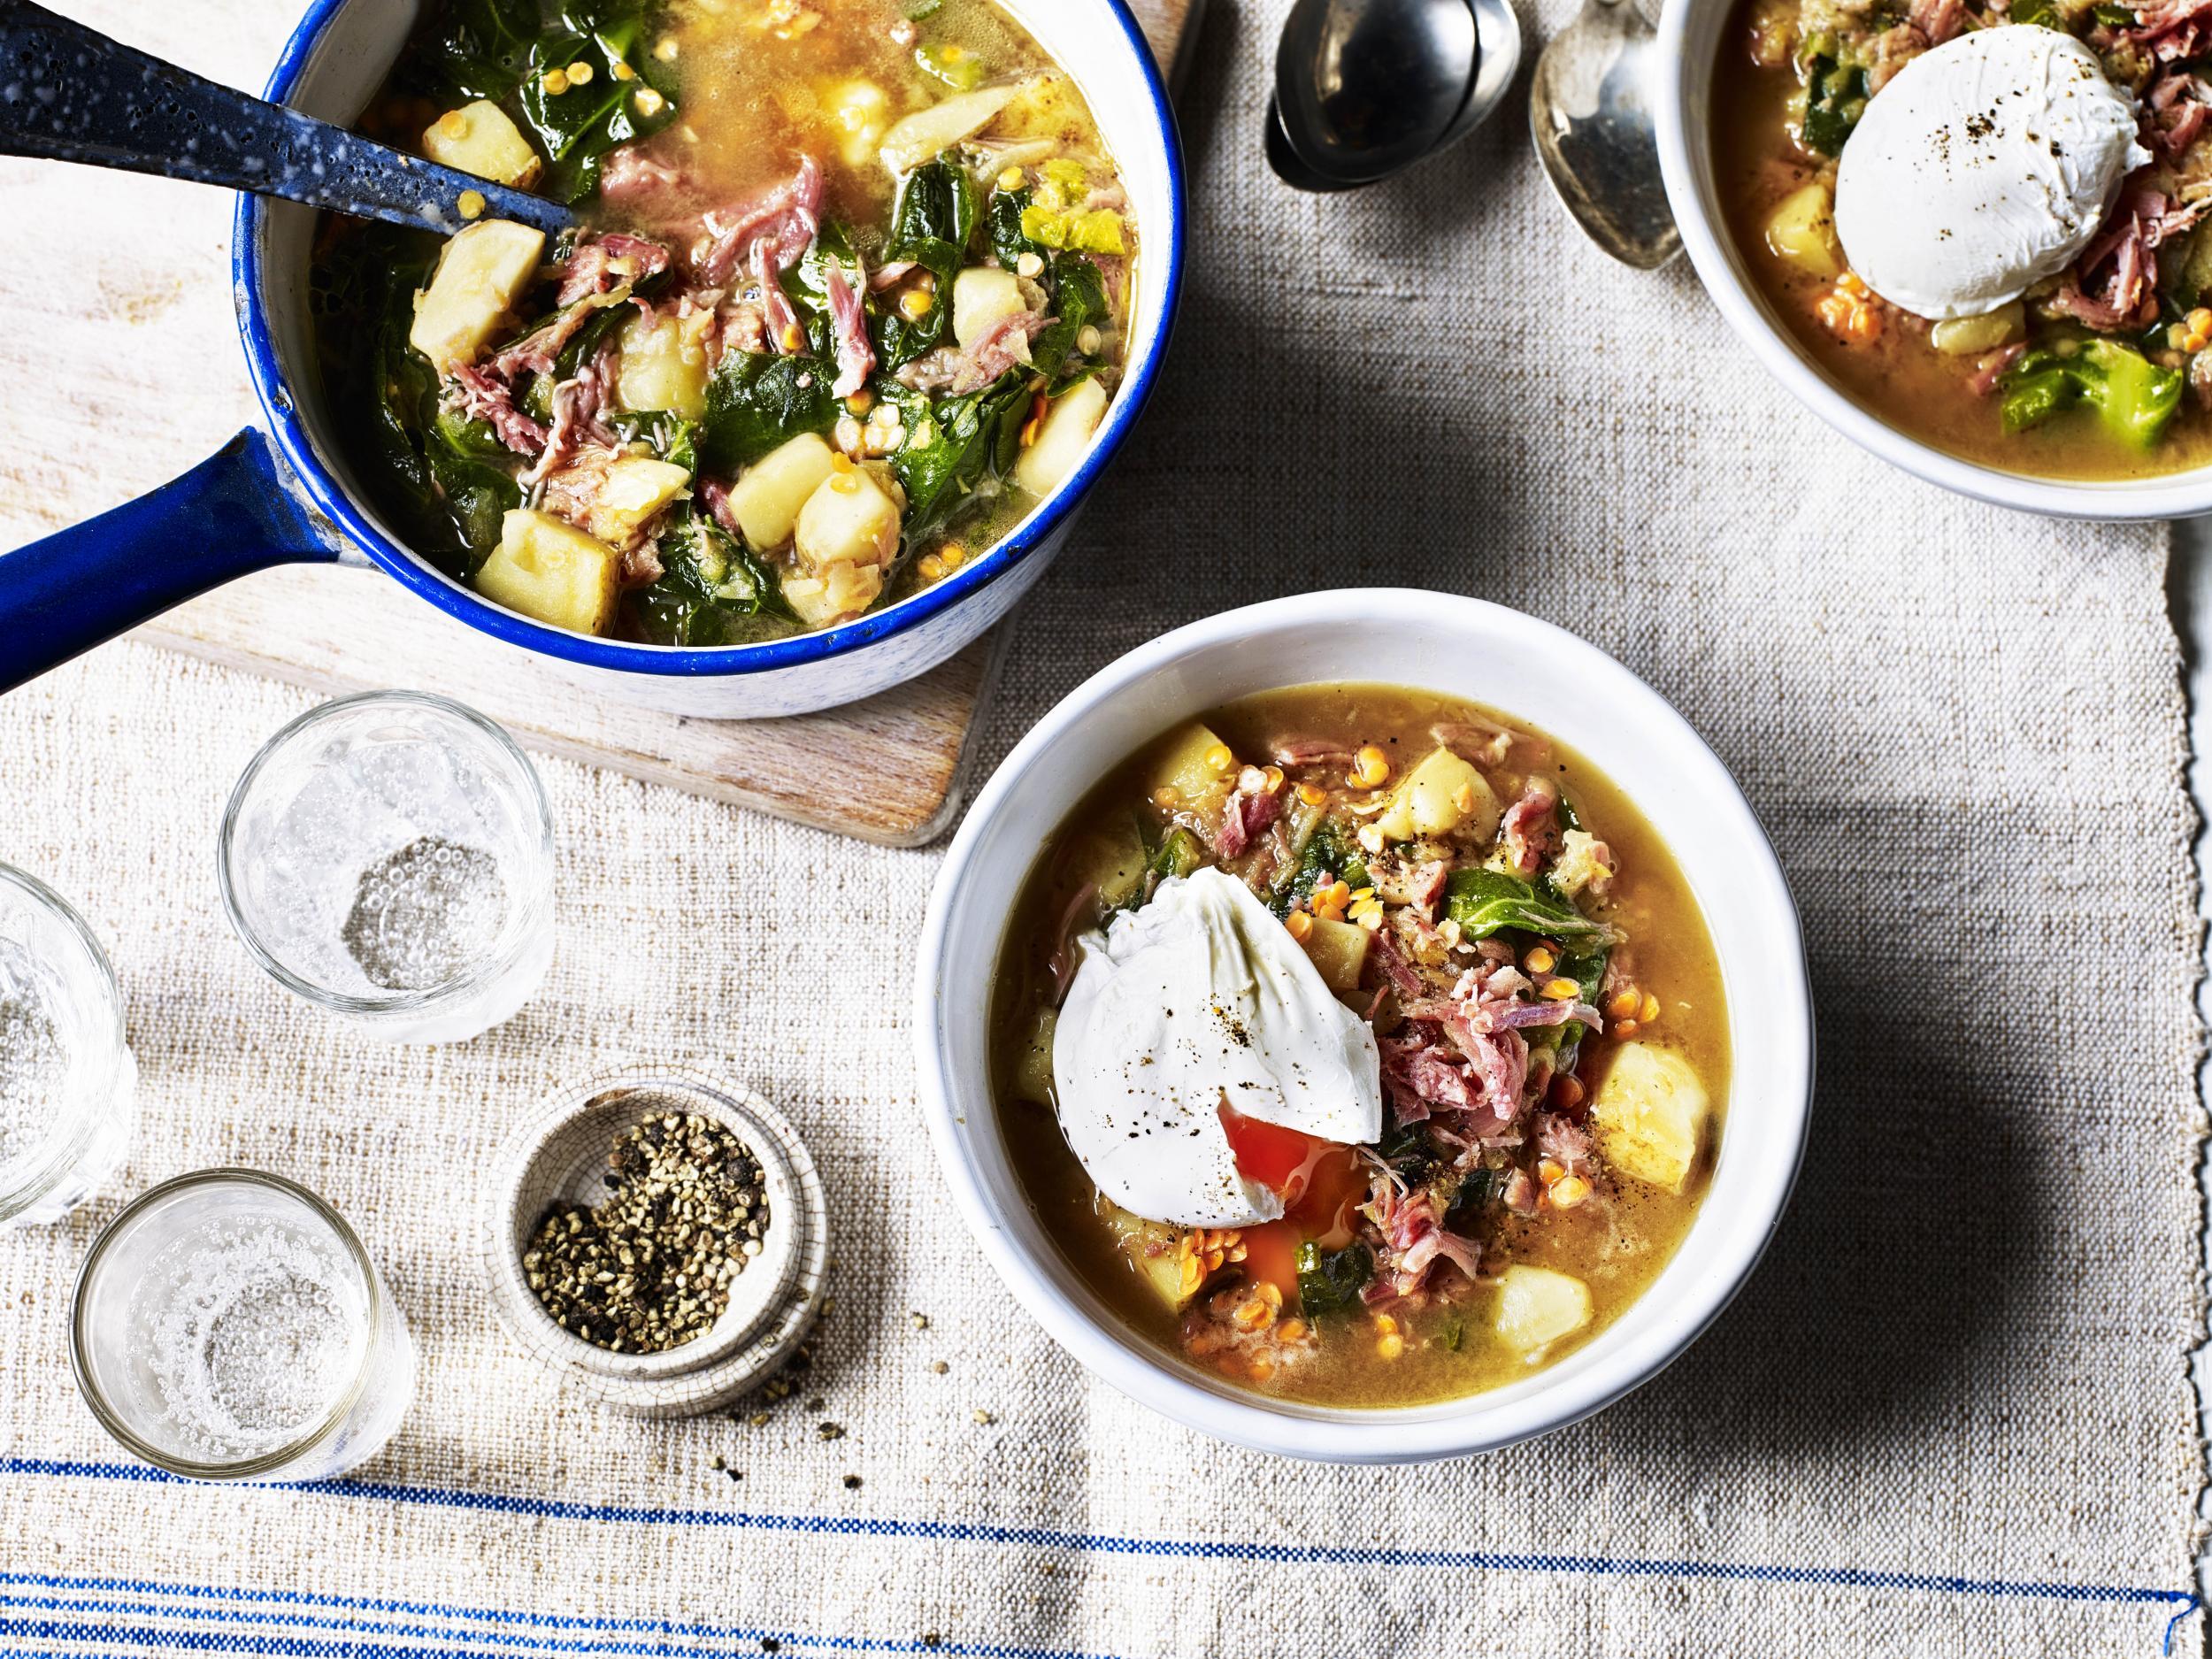 Hock, stock and two smokin’ spuds: a real winter warmer